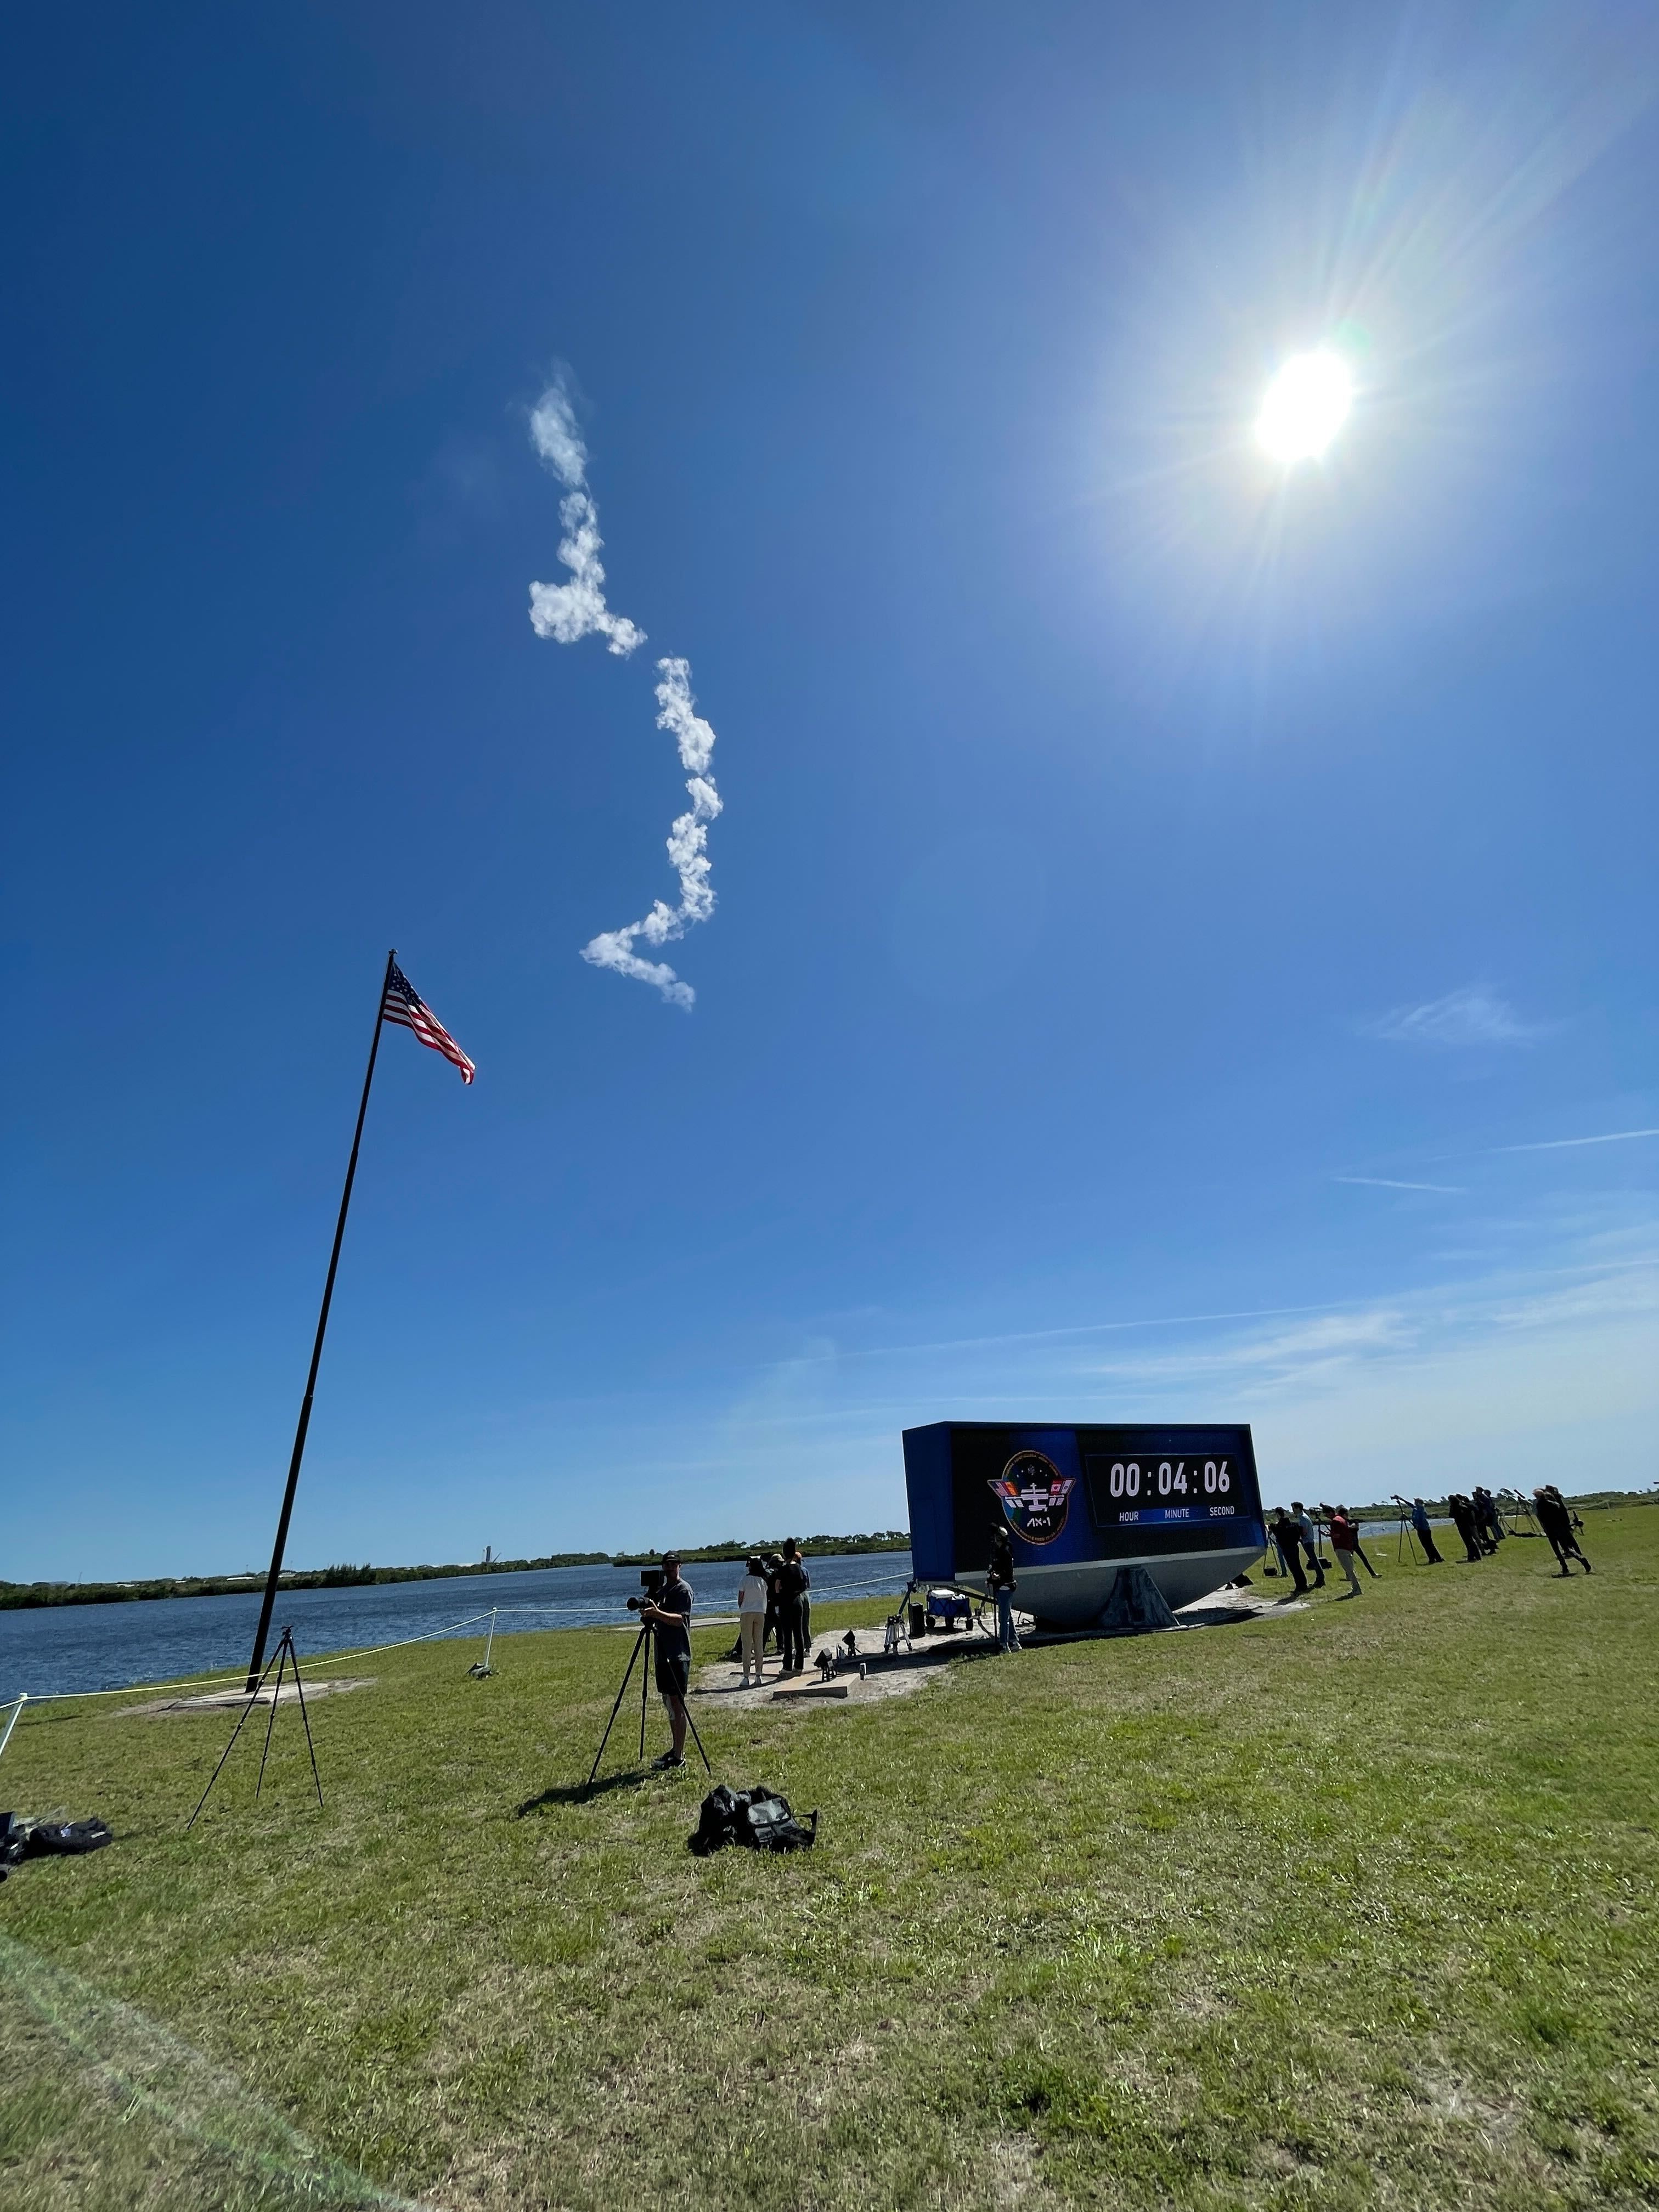 A view of the Ax-1 launch from the ground.